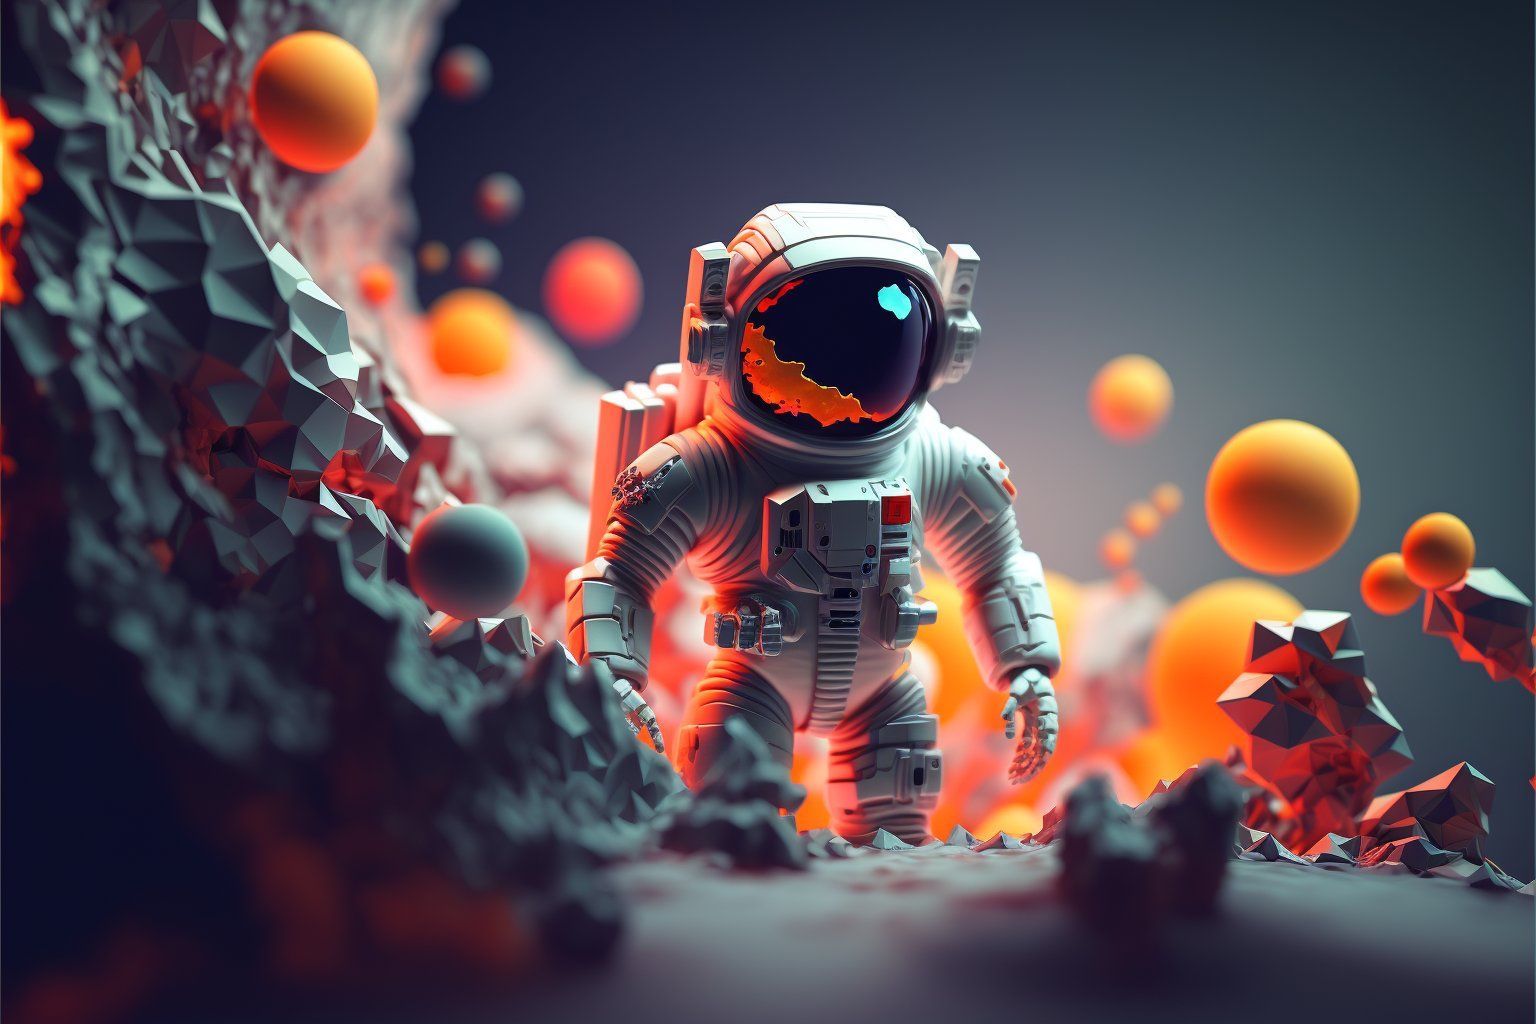 I Love The Space Themes Low Poly Aesthetic. So Here A Few More Image That Didn't Make The Cut